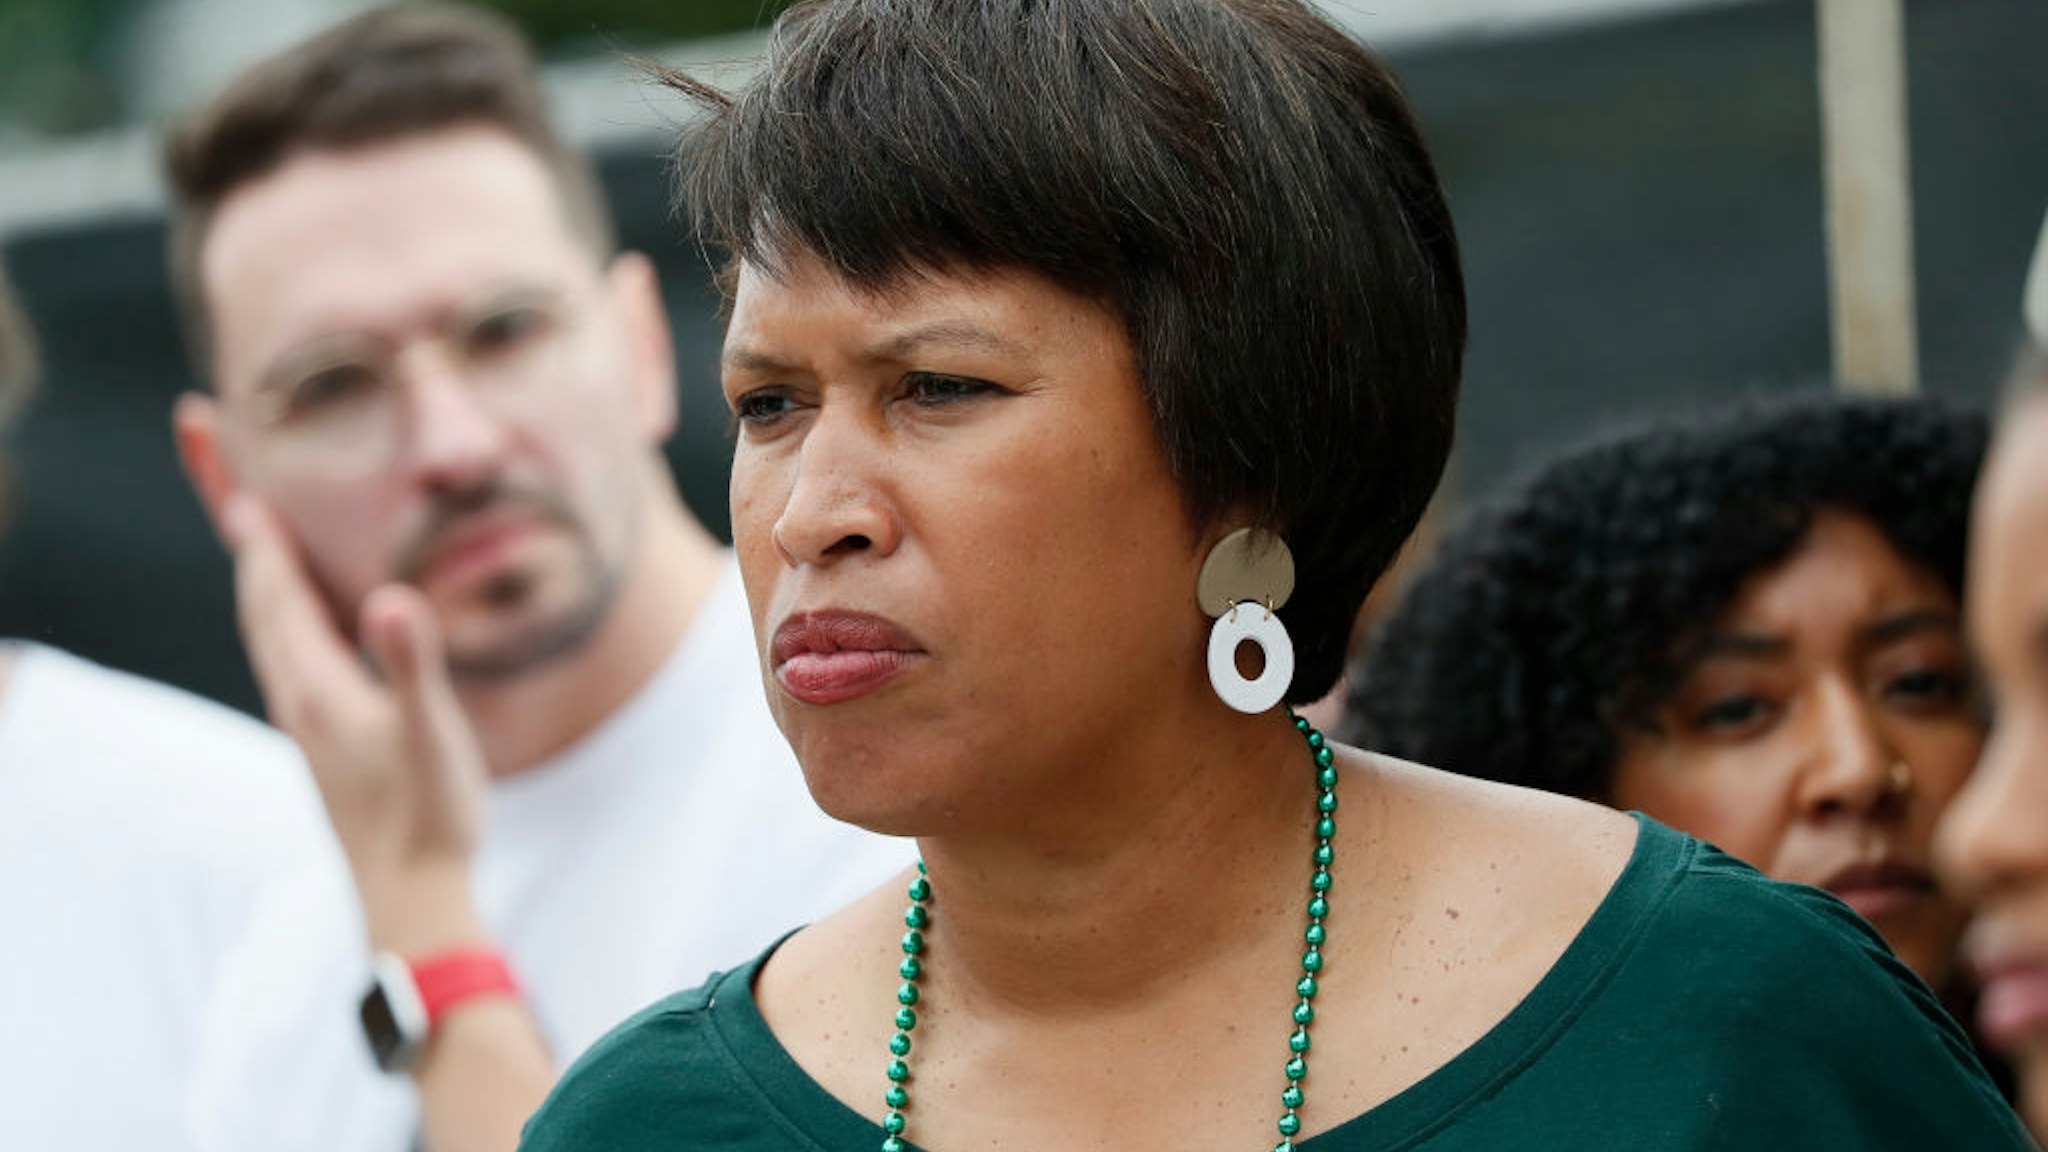 WASHINGTON, DC - JUNE 11: D.C. Mayor Muriel Bowser attends March for Our Lives 2022 on June 11, 2022 in Washington, DC. (Photo by Paul Morigi/Getty Images for March For Our Lives)